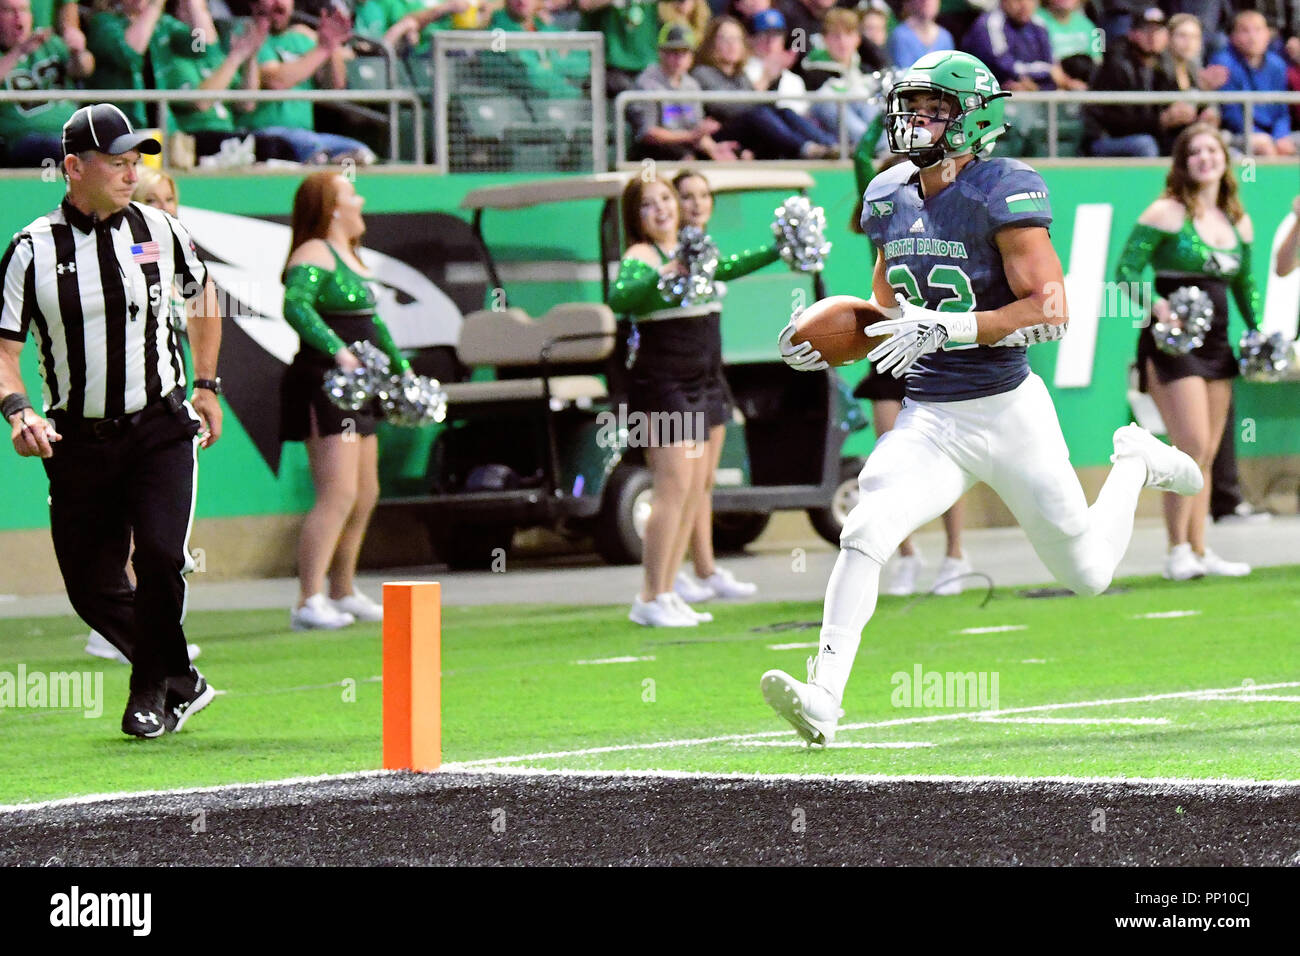 Grand Forks, North Dakota, USA. 22nd Sep, 2018. North Dakota Fighting Hawks running back John Santiago (22) scores a touchdown during a NCAA football game between Idaho State and the University of North Dakota at the Alerus Center in Grand Forks, North Dakota. Idaho State won 25 to 21. Russell Hons/CSM/Alamy Live News Credit: Cal Sport Media/Alamy Live News Stock Photo